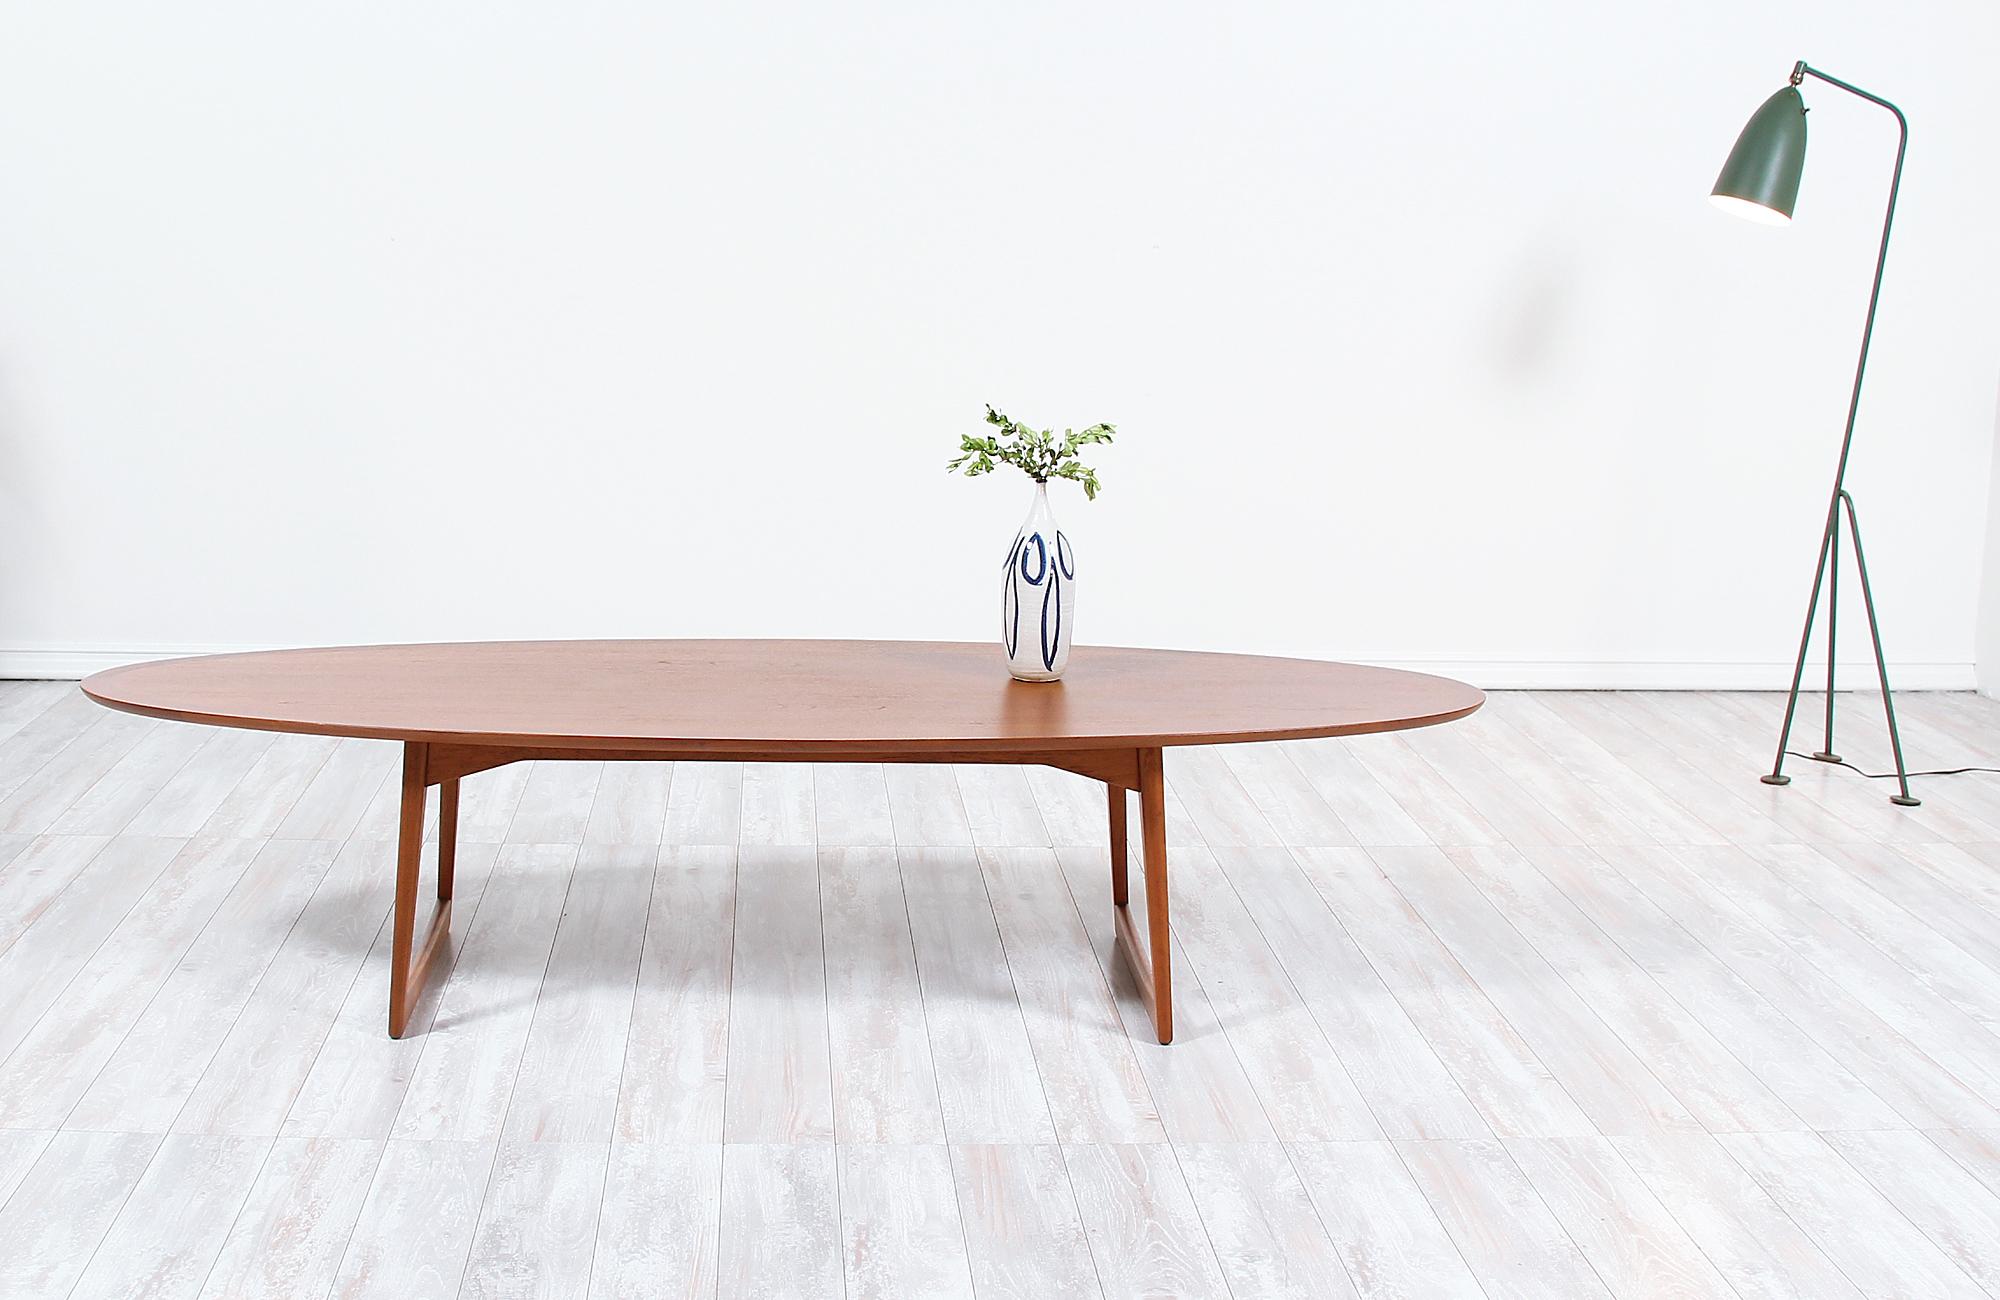 Elegant surfboard style coffee table imported from Denmark by Moreddi circa 1950s. This fantastic design has been meticulously crafted in teak wood and supported by a sled style and slightly angled sculptural legs. The tabletop shows a richly warm